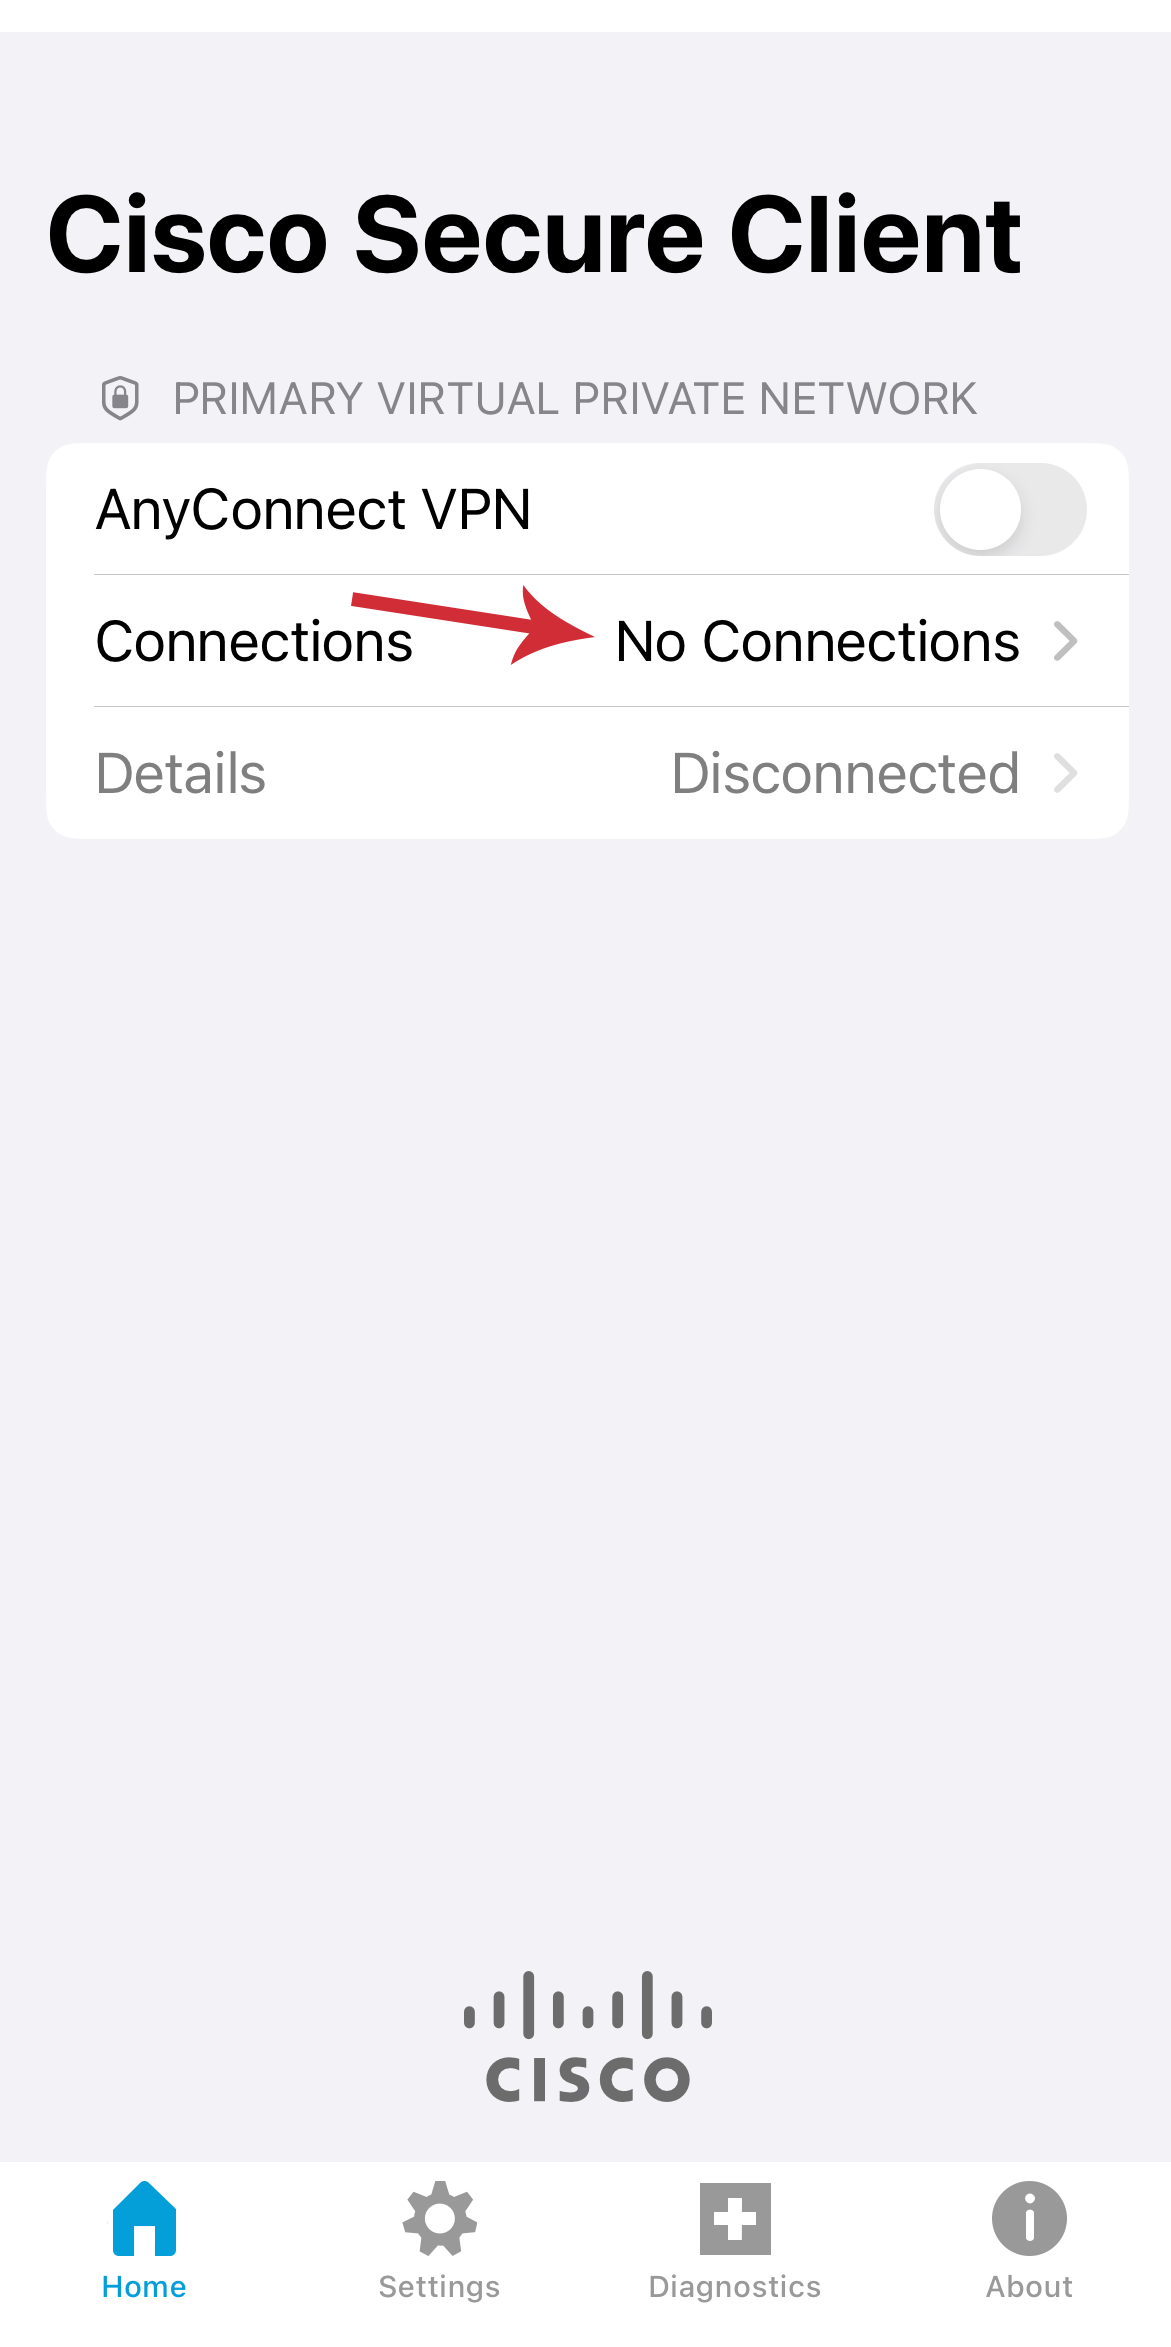 Selecting the Connections button